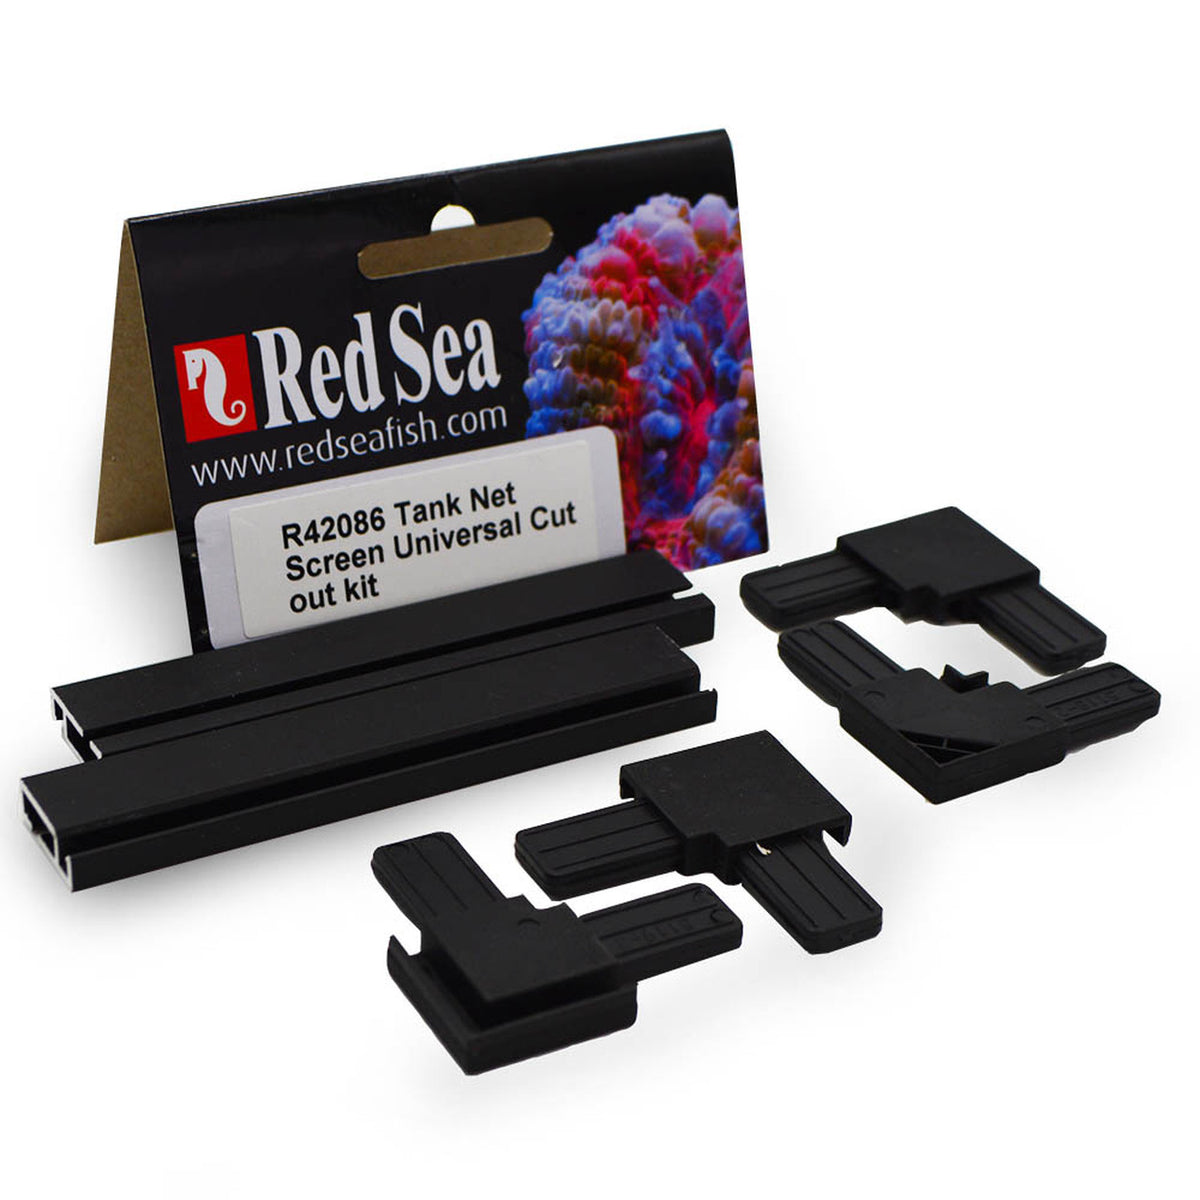 Red Sea Net Cover Universal Cut Out Kit (R42086)